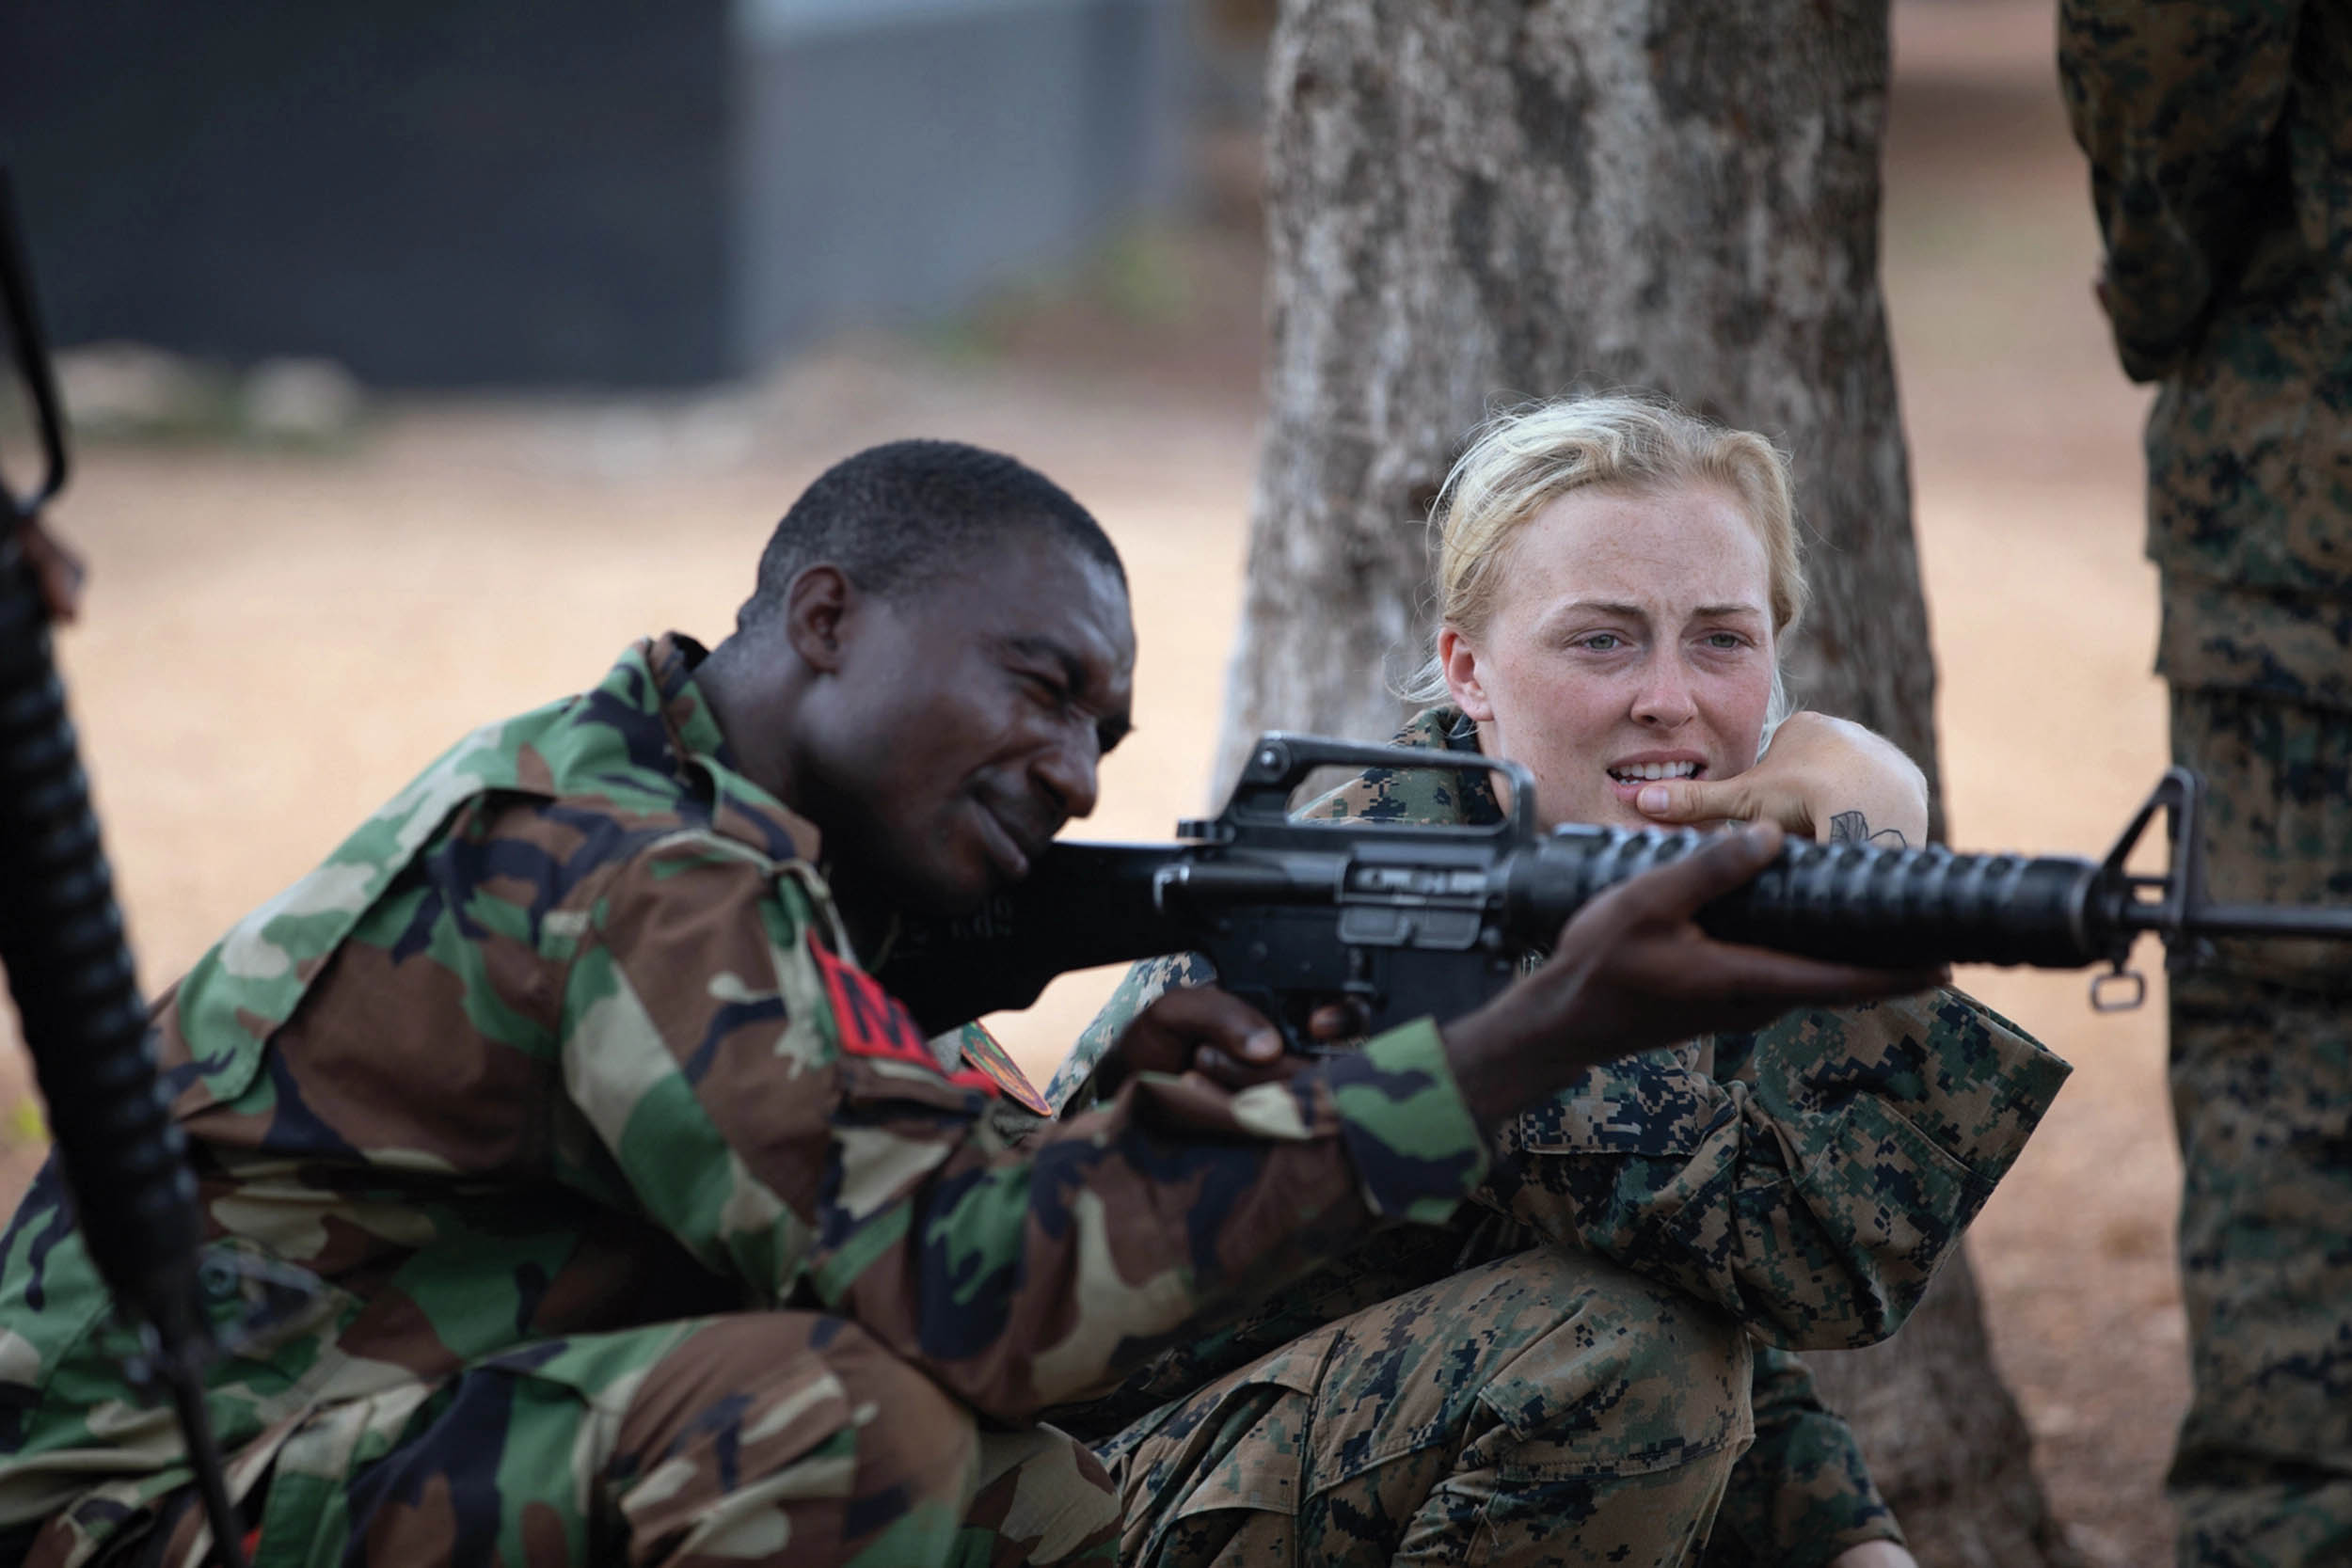 U.S. Marine Corps Sergeant Mercedes Klein trains with Ghanaian army soldier Sergeant Joseph Akataaba on marksmanship fundamentals during exercise African Lion, near Daboya, Ghana, June 7, 2023 (U.S. Army/Nathan Baker)